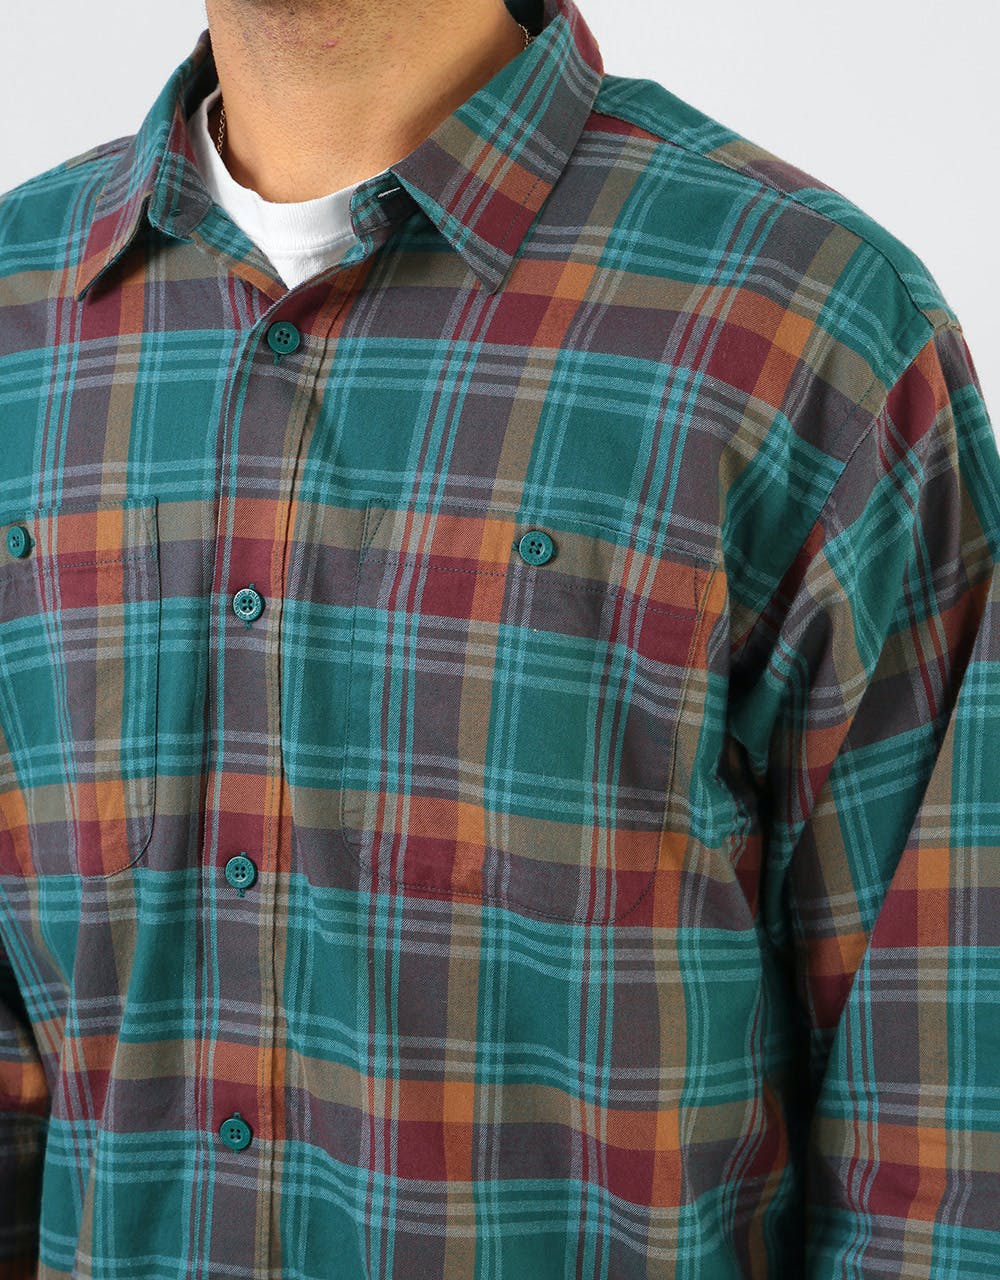 Patagonia L/S Pima Cotton Shirt - Buttes Small: Piki Green